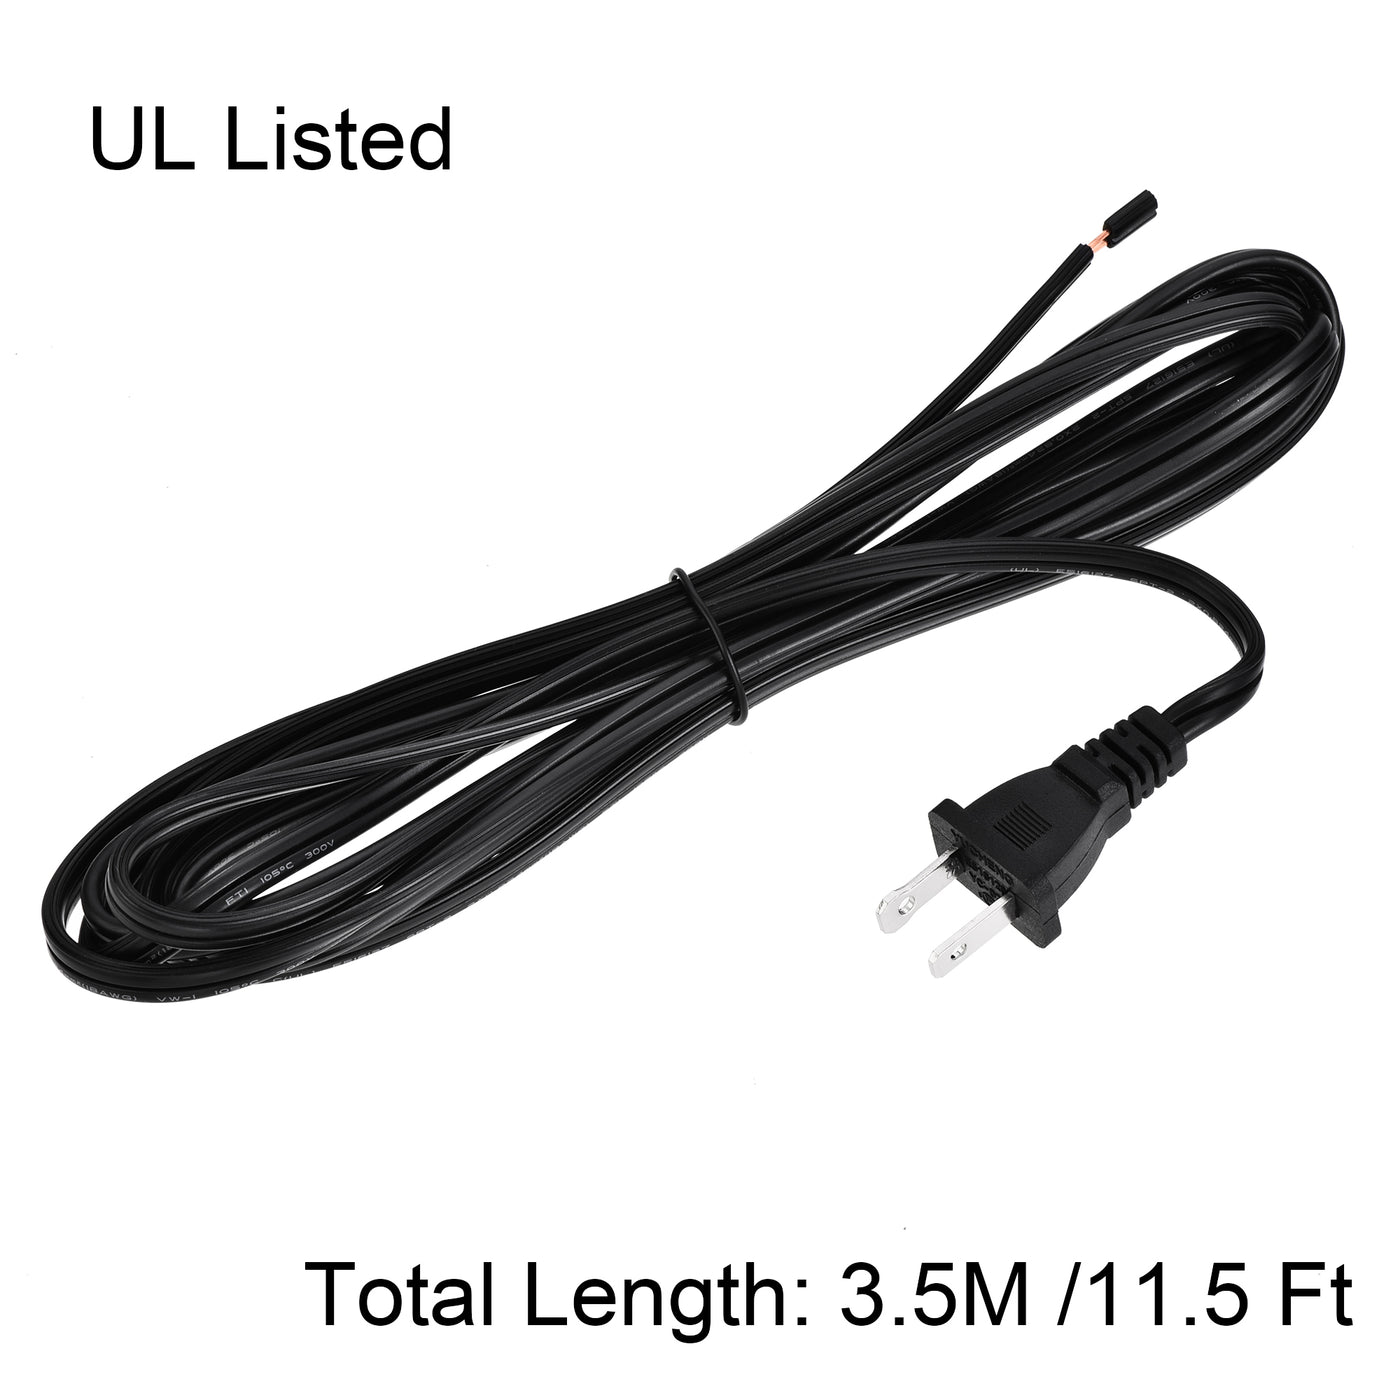 uxcell Uxcell US Plug Lamp Cord, SPT-2 18AWG Power Wire 3.5M Black, UL Listed, Replacement Lamp Repair Part 3Pcs